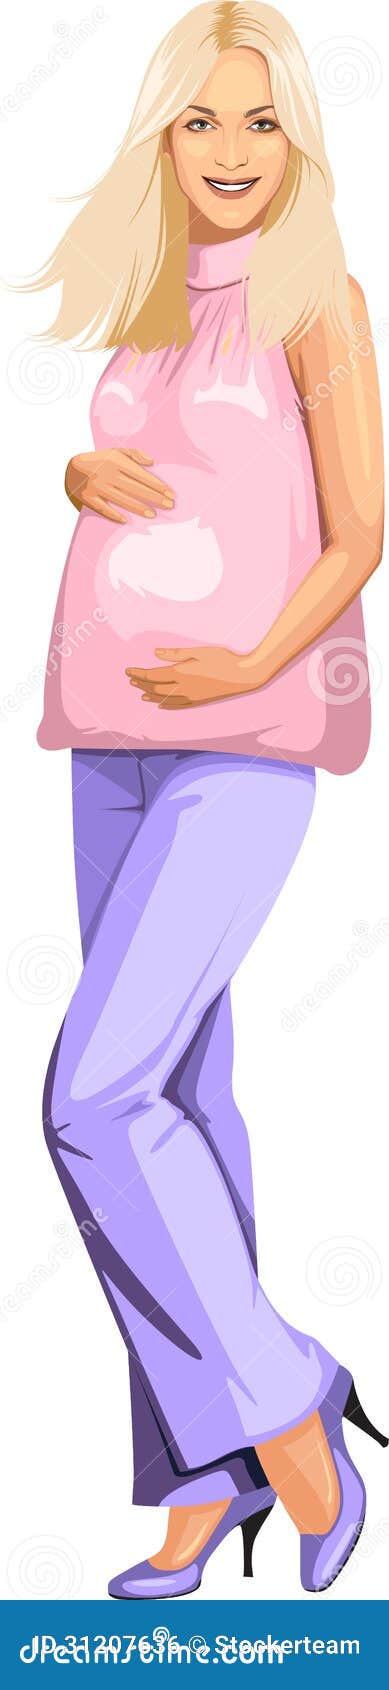 Pregnant Blonde Girl In Pink Isolated On White Background Royalty Free ...